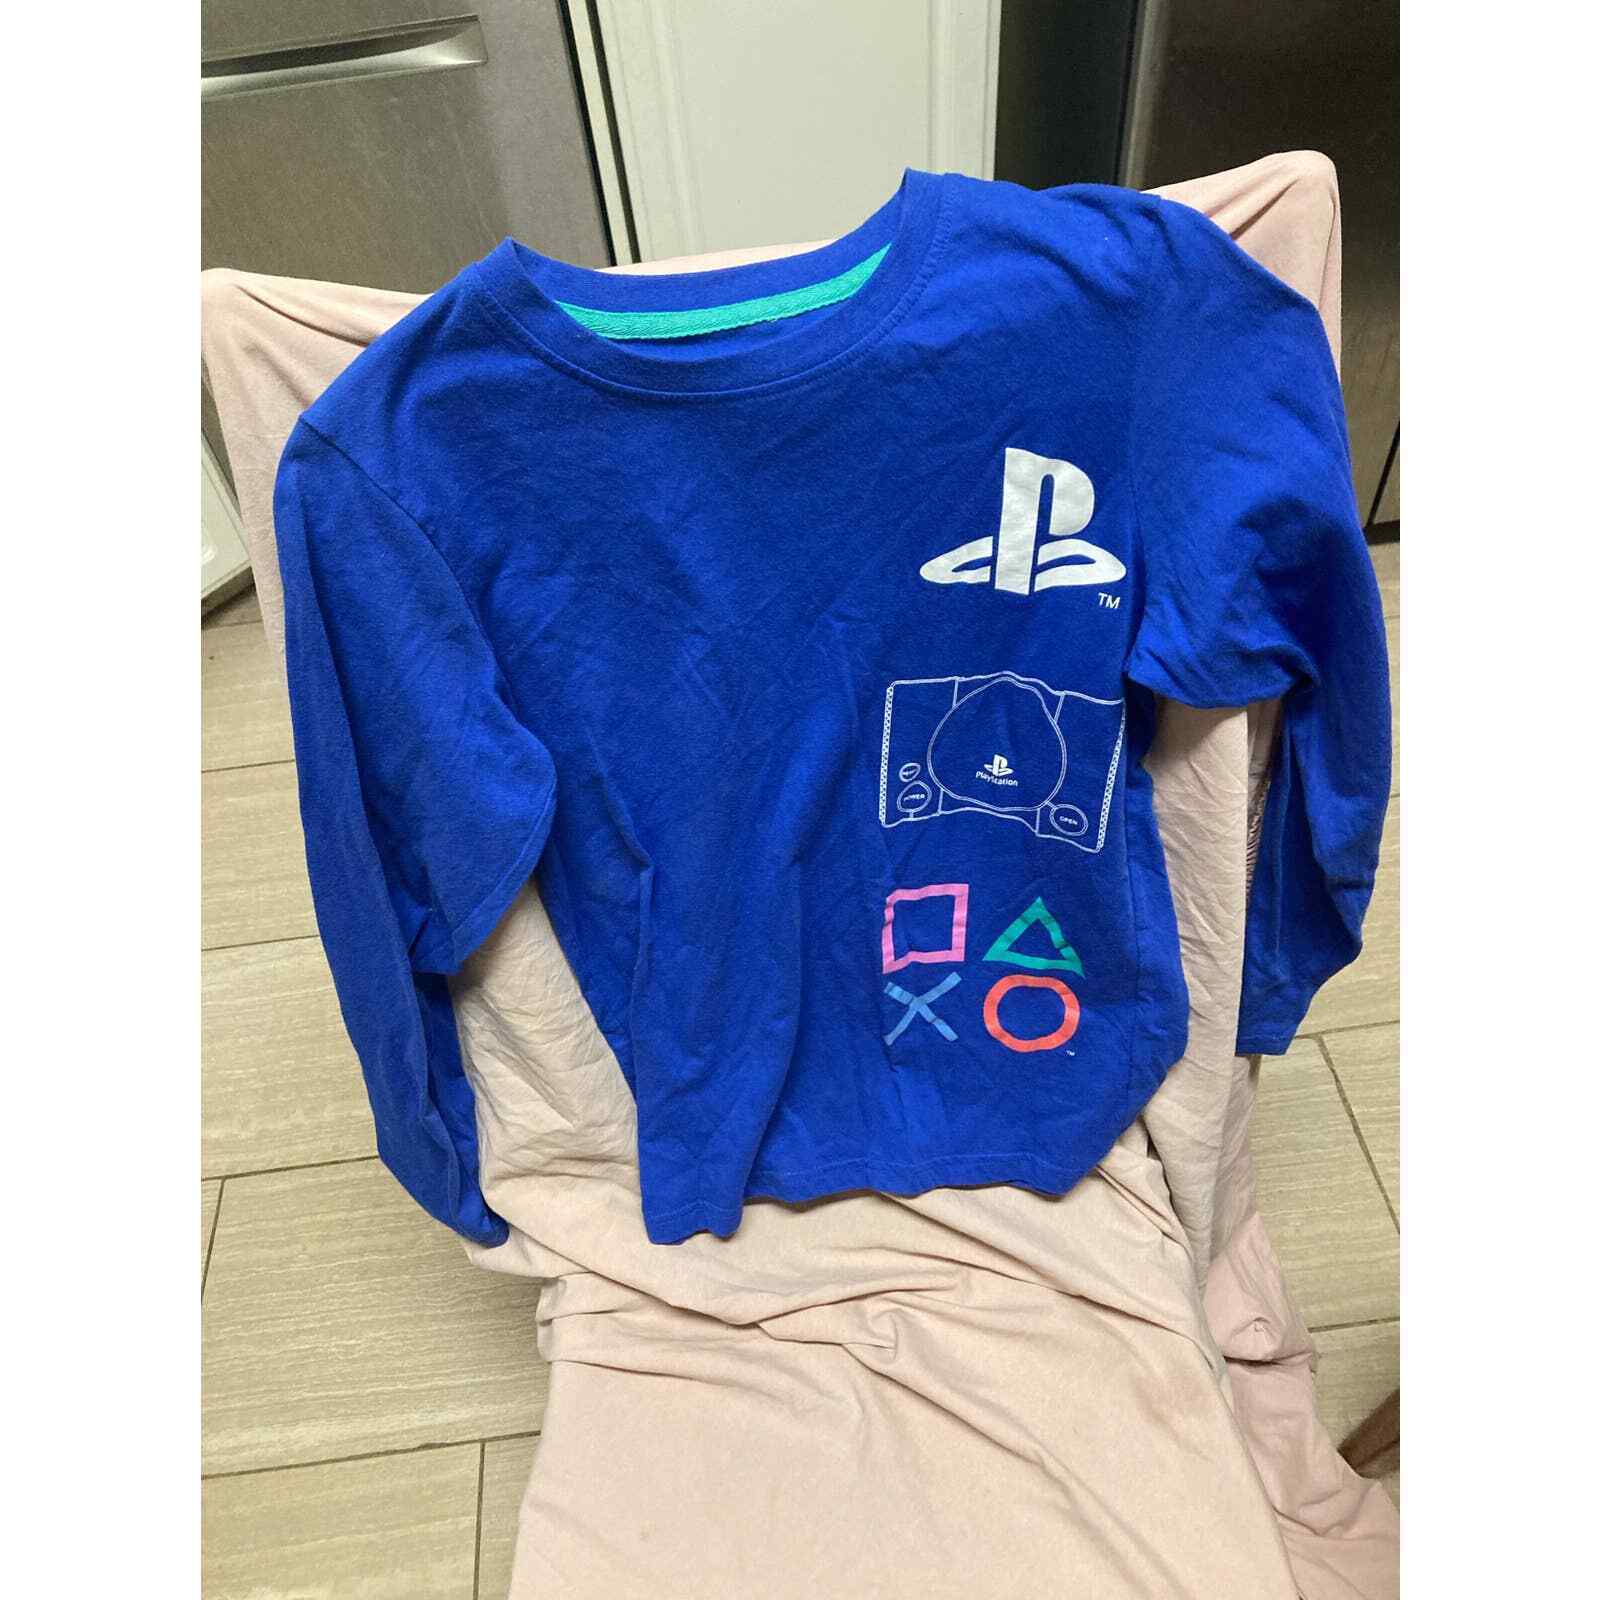 Primary image for Kids PlayStation Long Sleeve Shirt Size XL